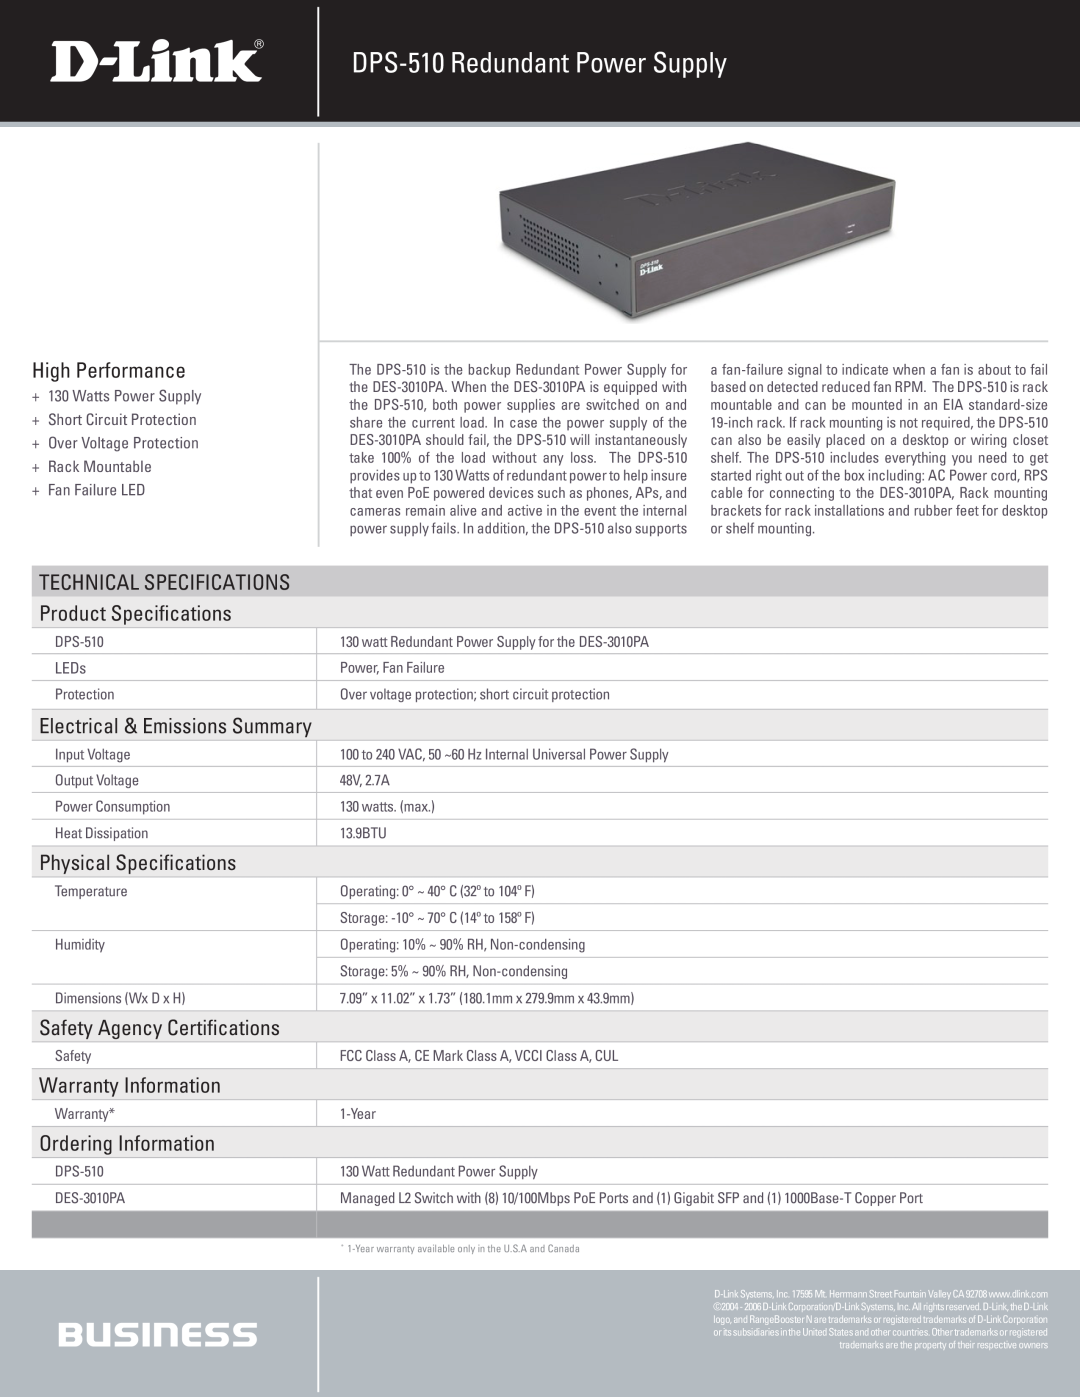 D-Link technical specifications DPS-510 Redundant Power Supply, High Performance, Electrical & Emissions Summary, LEDs 